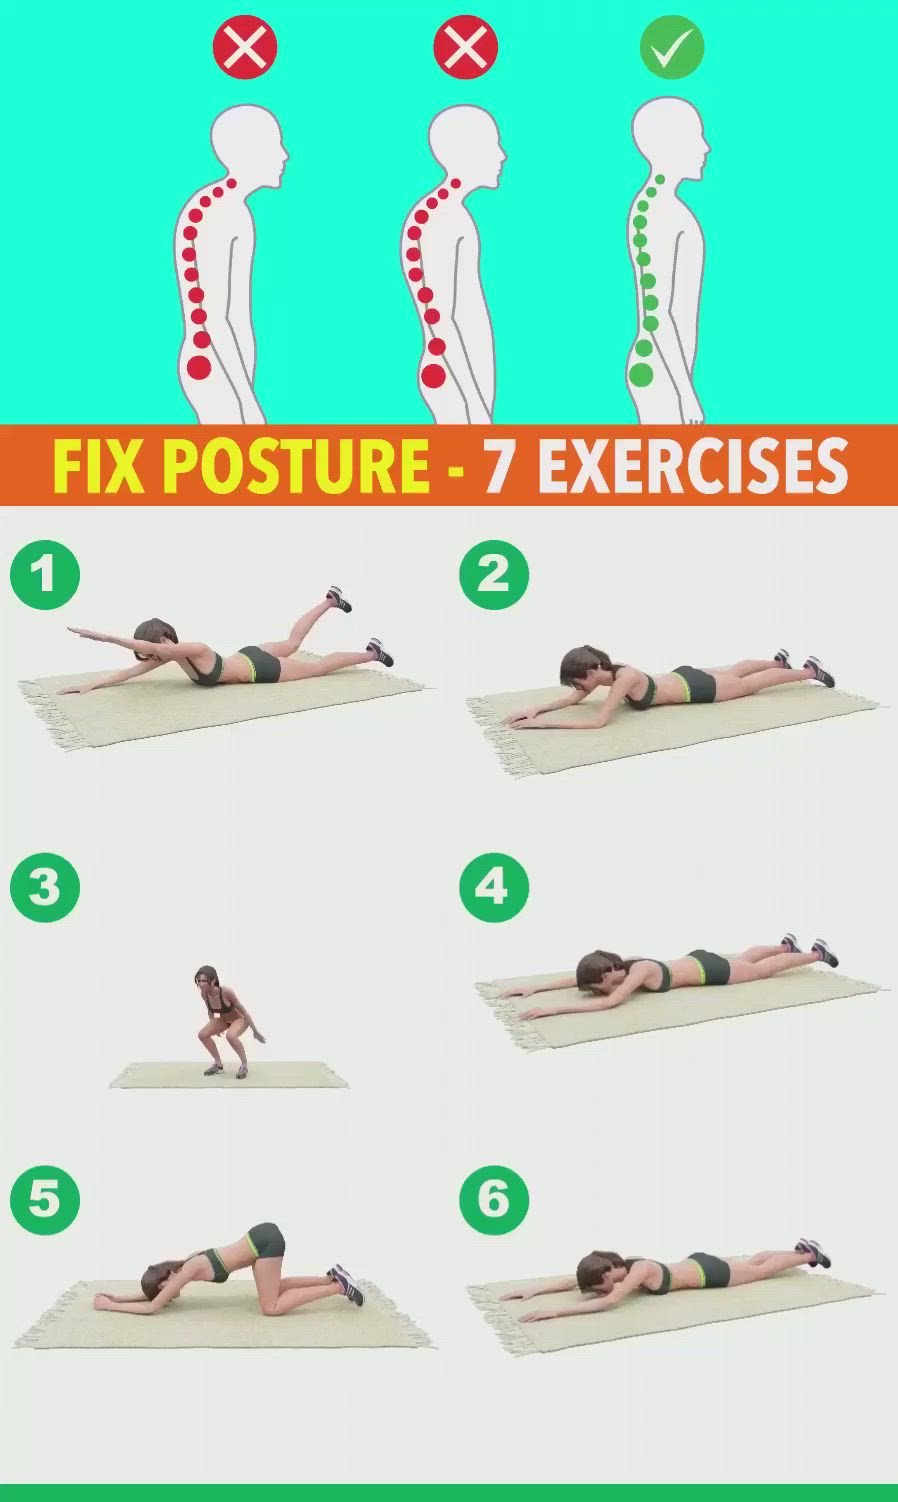 This may contain: a poster showing how to do an exercise for the back and side planks, with instructions